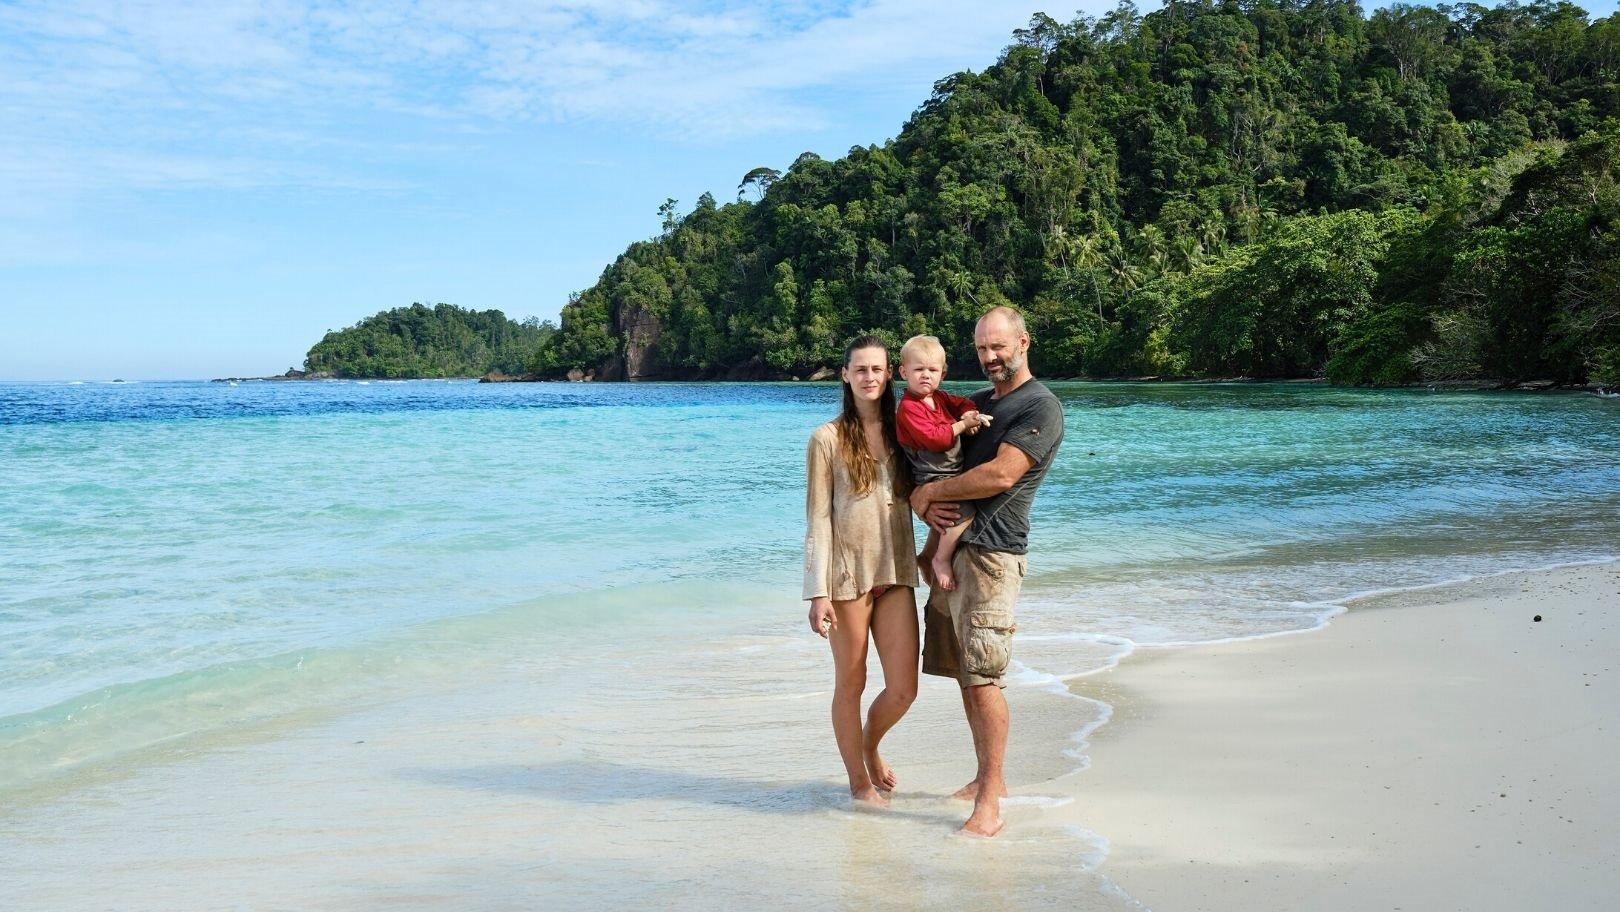 Ed Stafford: Why I took my wife and baby to survive on a desert island | Flash Pack